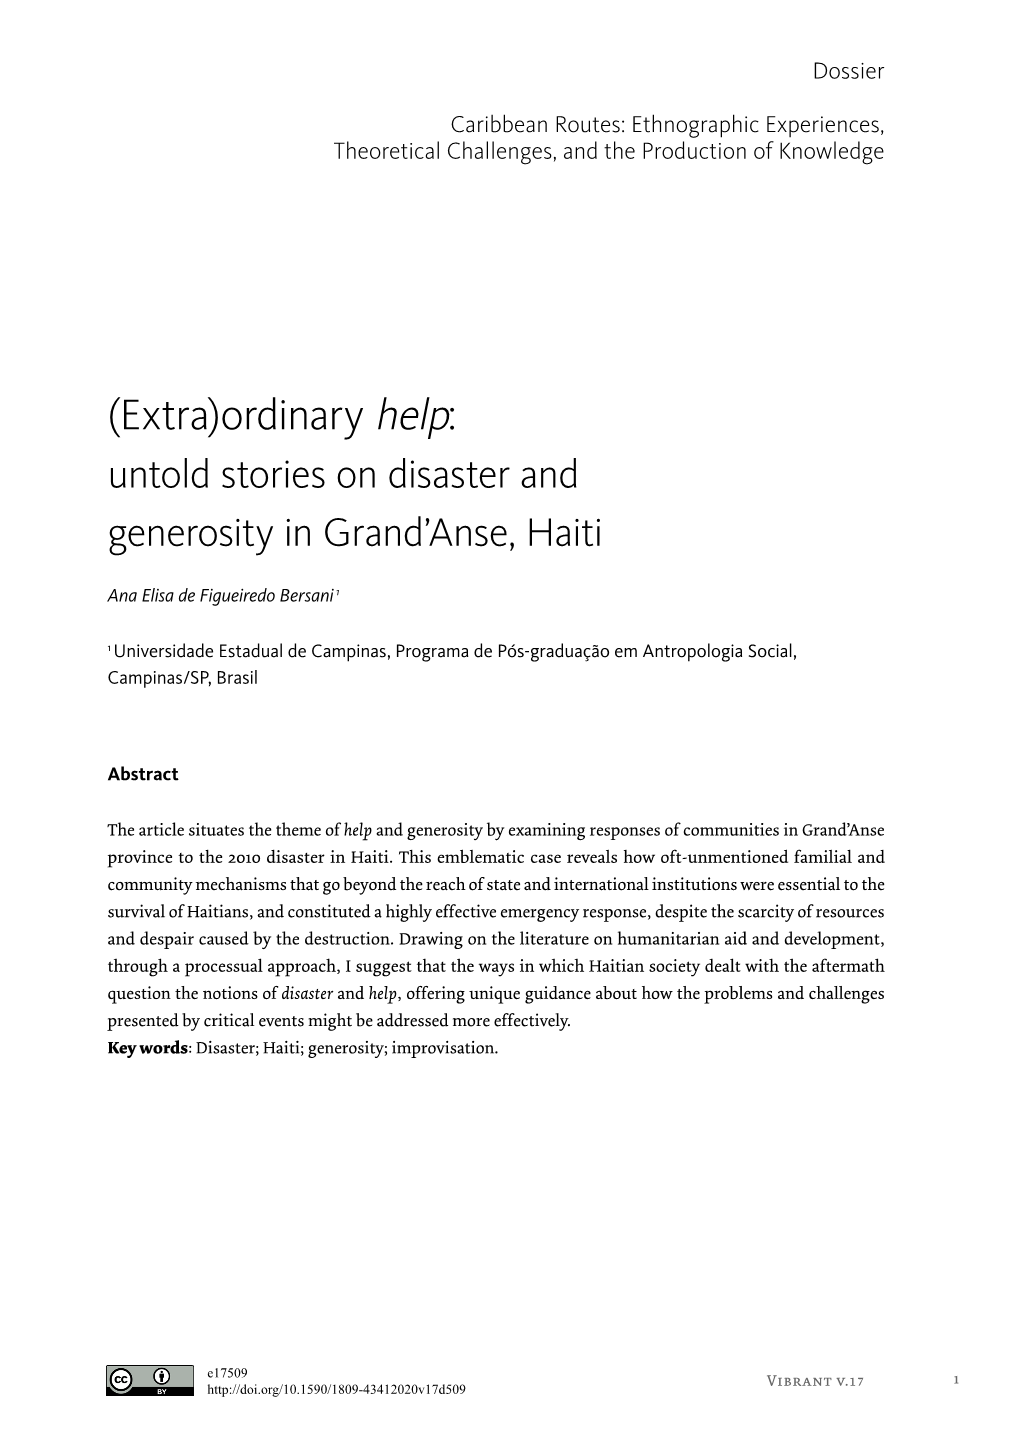 Ordinary Help: Untold Stories on Disaster and Generosity in Grand’Anse, Haiti